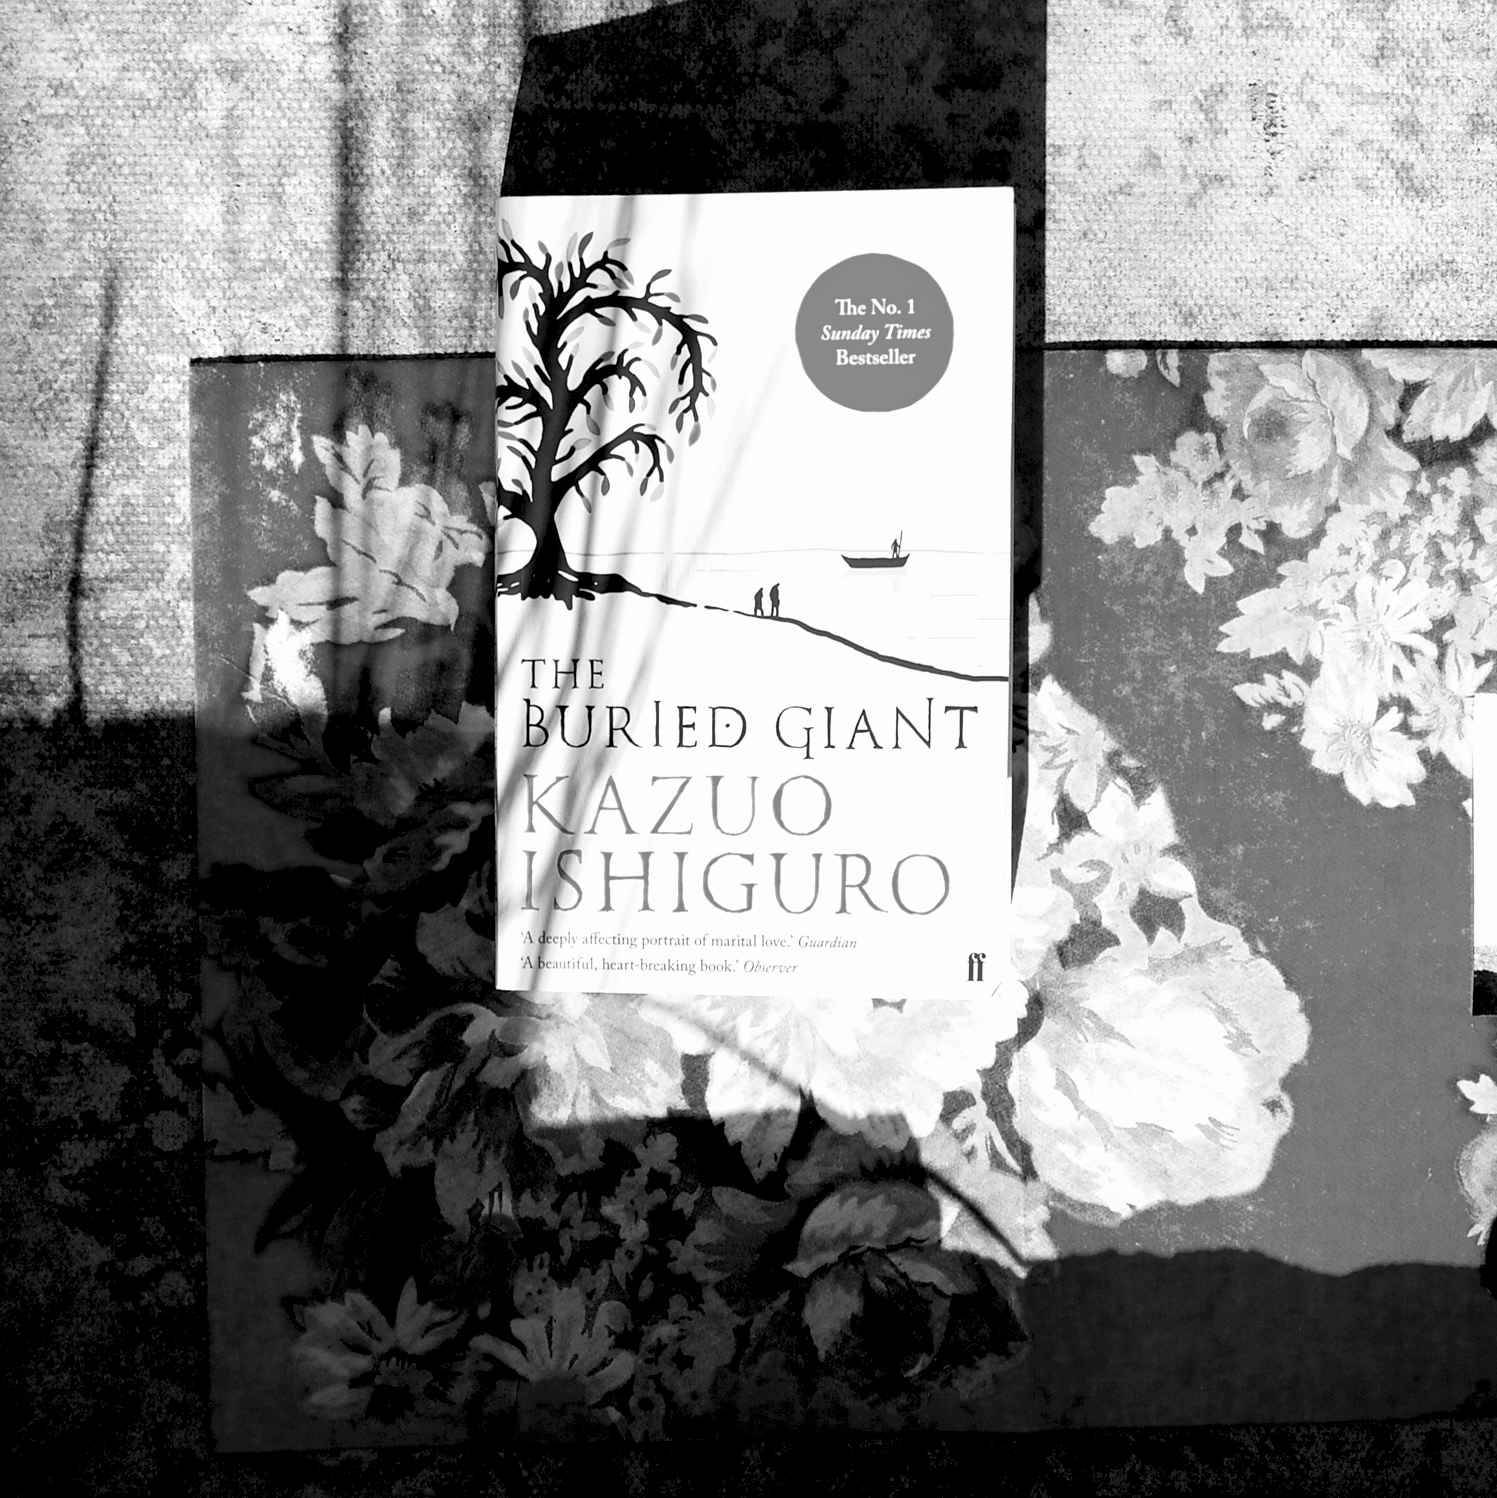 The Buried Giant by Kazuo Ishiguro. Photograph of The Buried Giant book cover. Thoughts, book review, opinion.